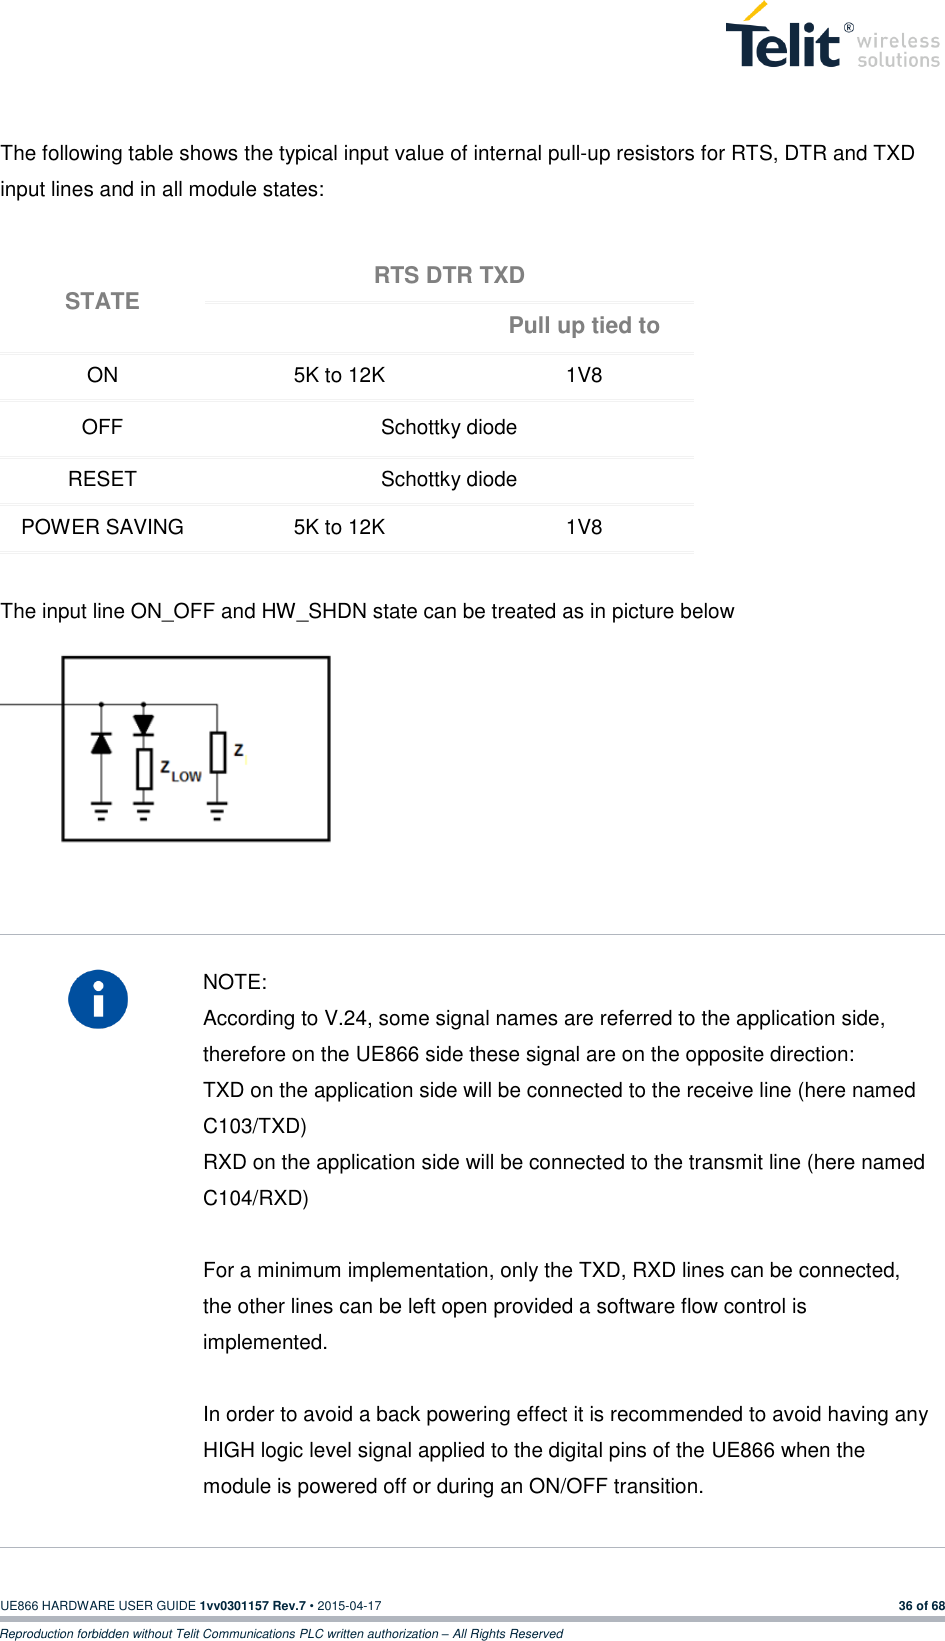  UE866 HARDWARE USER GUIDE 1vv0301157 Rev.7 • 2015-04-17 36 of 68 Reproduction forbidden without Telit Communications PLC written authorization – All Rights Reserved   The following table shows the typical input value of internal pull-up resistors for RTS, DTR and TXD input lines and in all module states: STATE RTS DTR TXD  Pull up tied to ON 5K to 12K 1V8 OFF Schottky diode RESET Schottky diode POWER SAVING 5K to 12K 1V8  The input line ON_OFF and HW_SHDN state can be treated as in picture below                NOTE: According to V.24, some signal names are referred to the application side, therefore on the UE866 side these signal are on the opposite direction:  TXD on the application side will be connected to the receive line (here named C103/TXD) RXD on the application side will be connected to the transmit line (here named C104/RXD)  For a minimum implementation, only the TXD, RXD lines can be connected, the other lines can be left open provided a software flow control is implemented.  In order to avoid a back powering effect it is recommended to avoid having any HIGH logic level signal applied to the digital pins of the UE866 when the module is powered off or during an ON/OFF transition.  